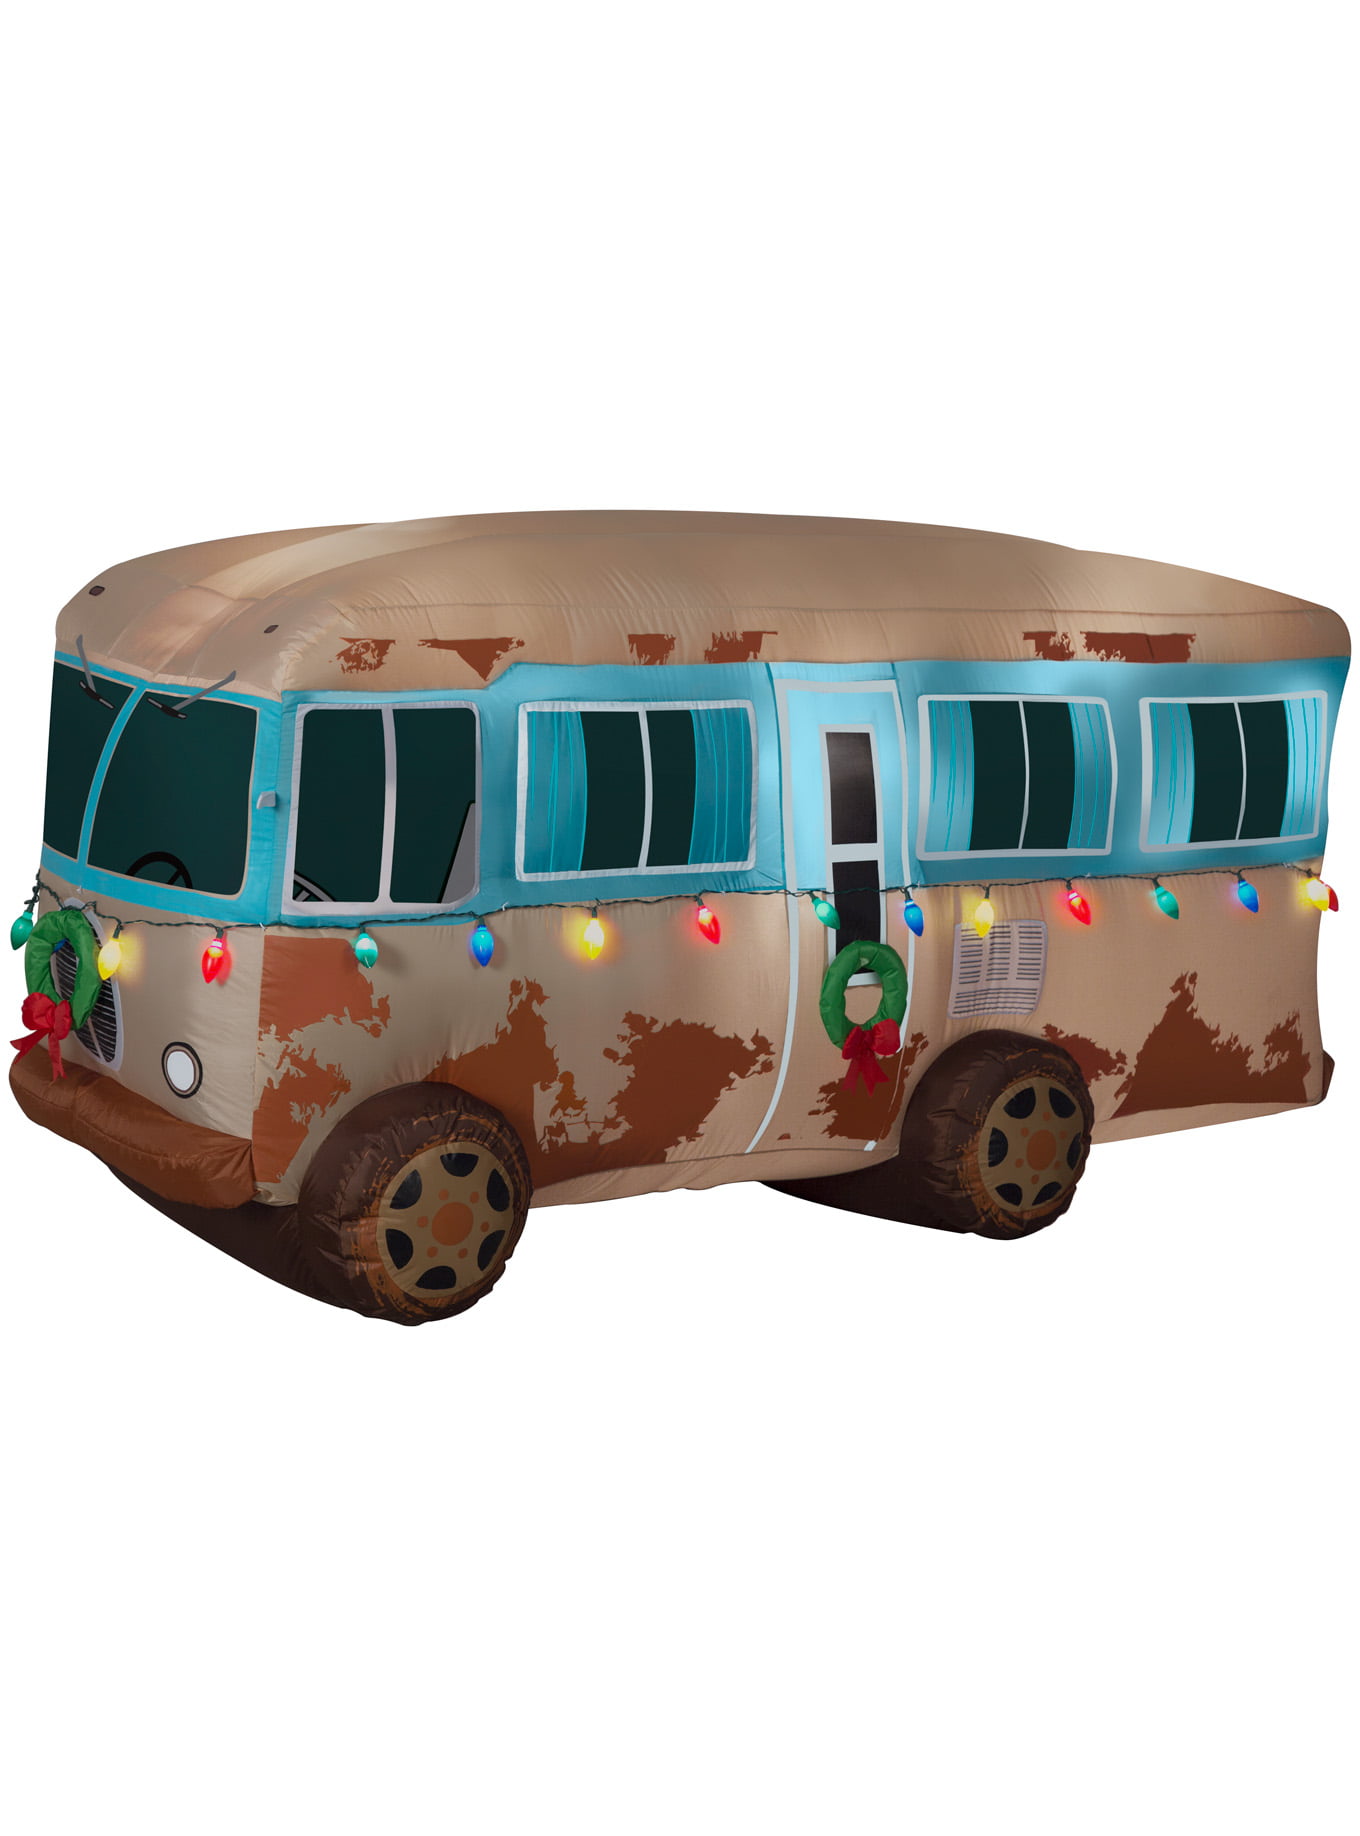 Airblown Cousin Eddie Camper RV National Lampoon Christmas Vacation Inflatable 